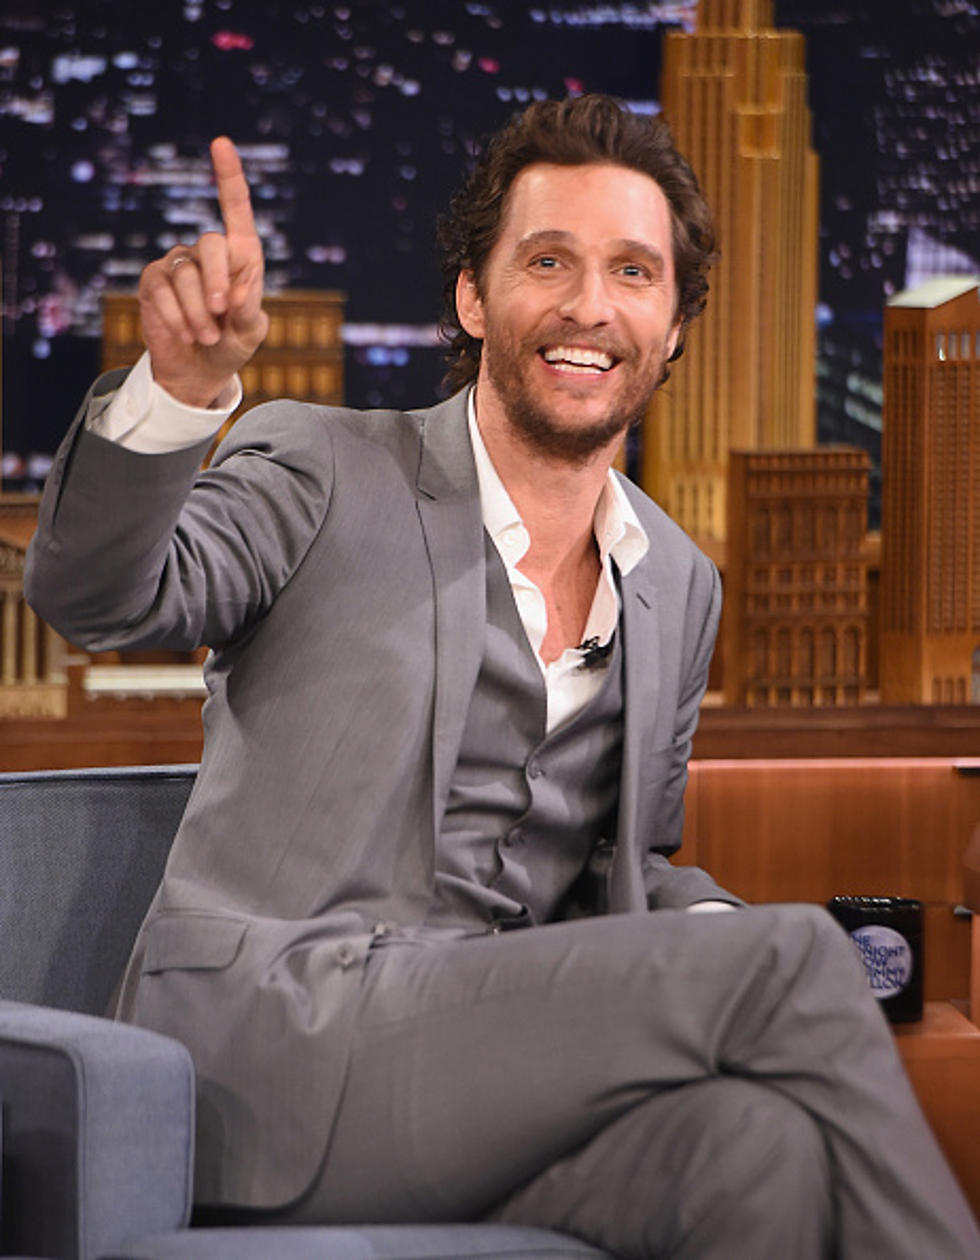 Matthew McConaughey Said That Shreveport Has The Most Beautiful Women…Or Did He?